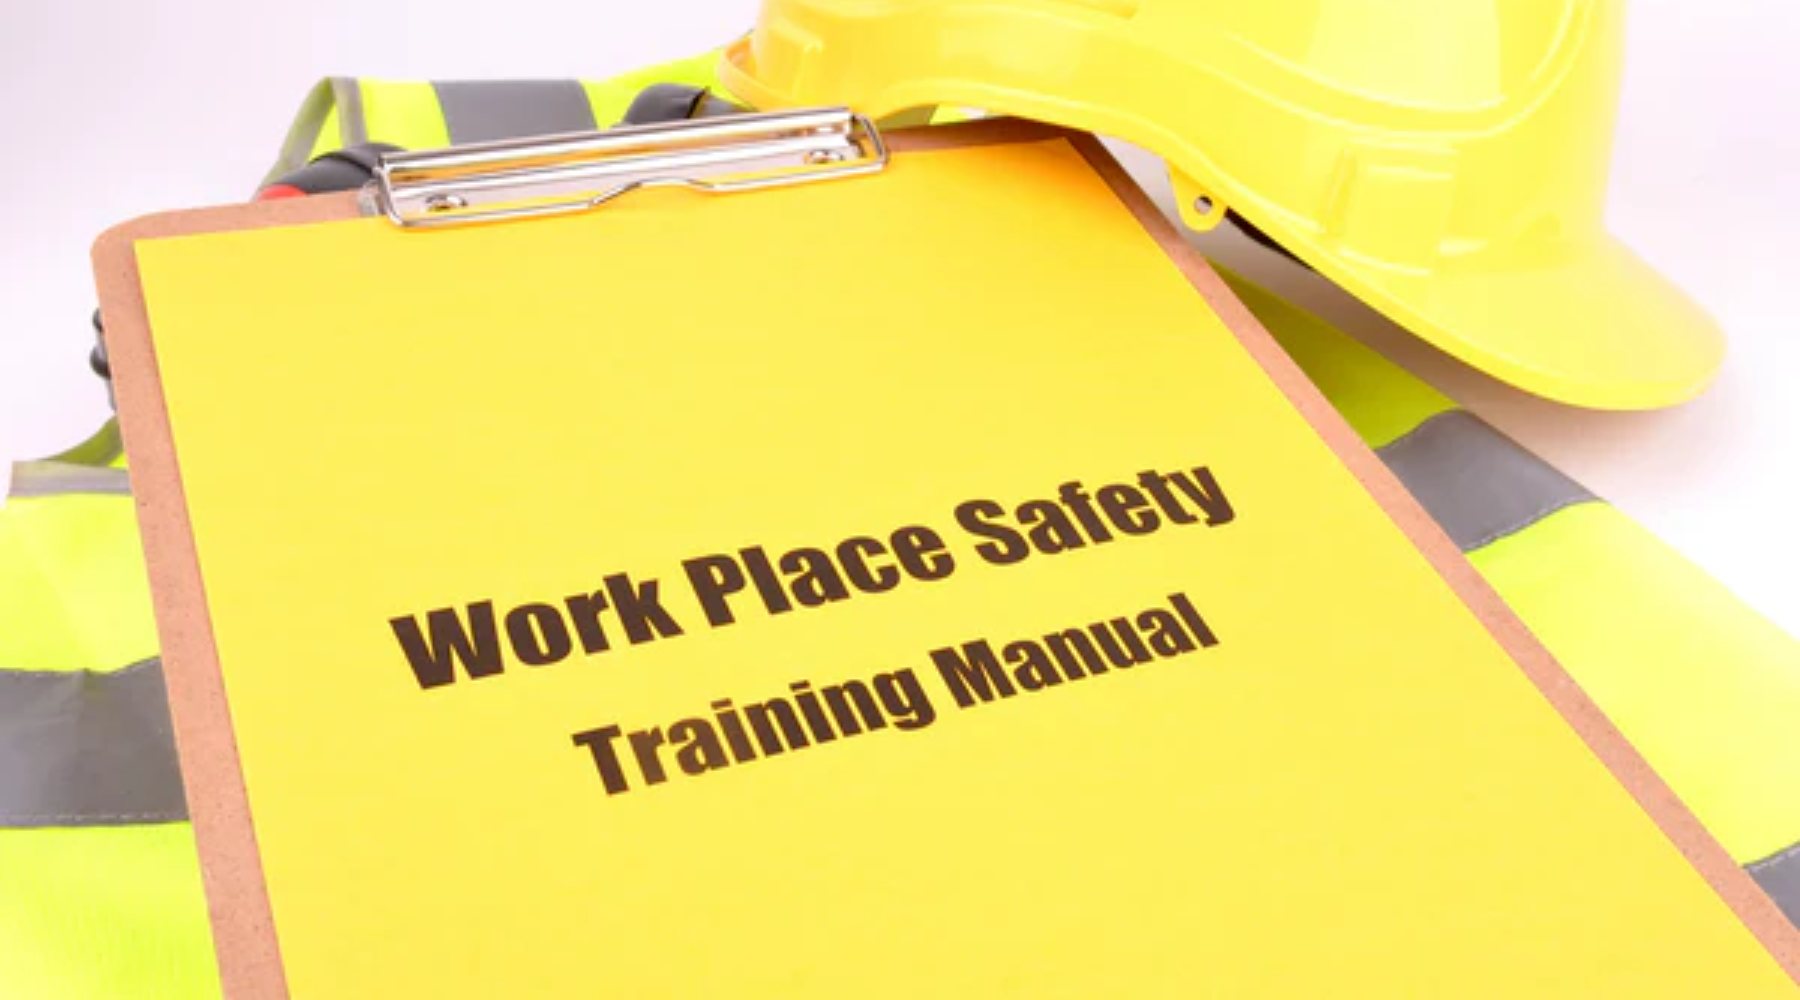 health and safety in the workplace